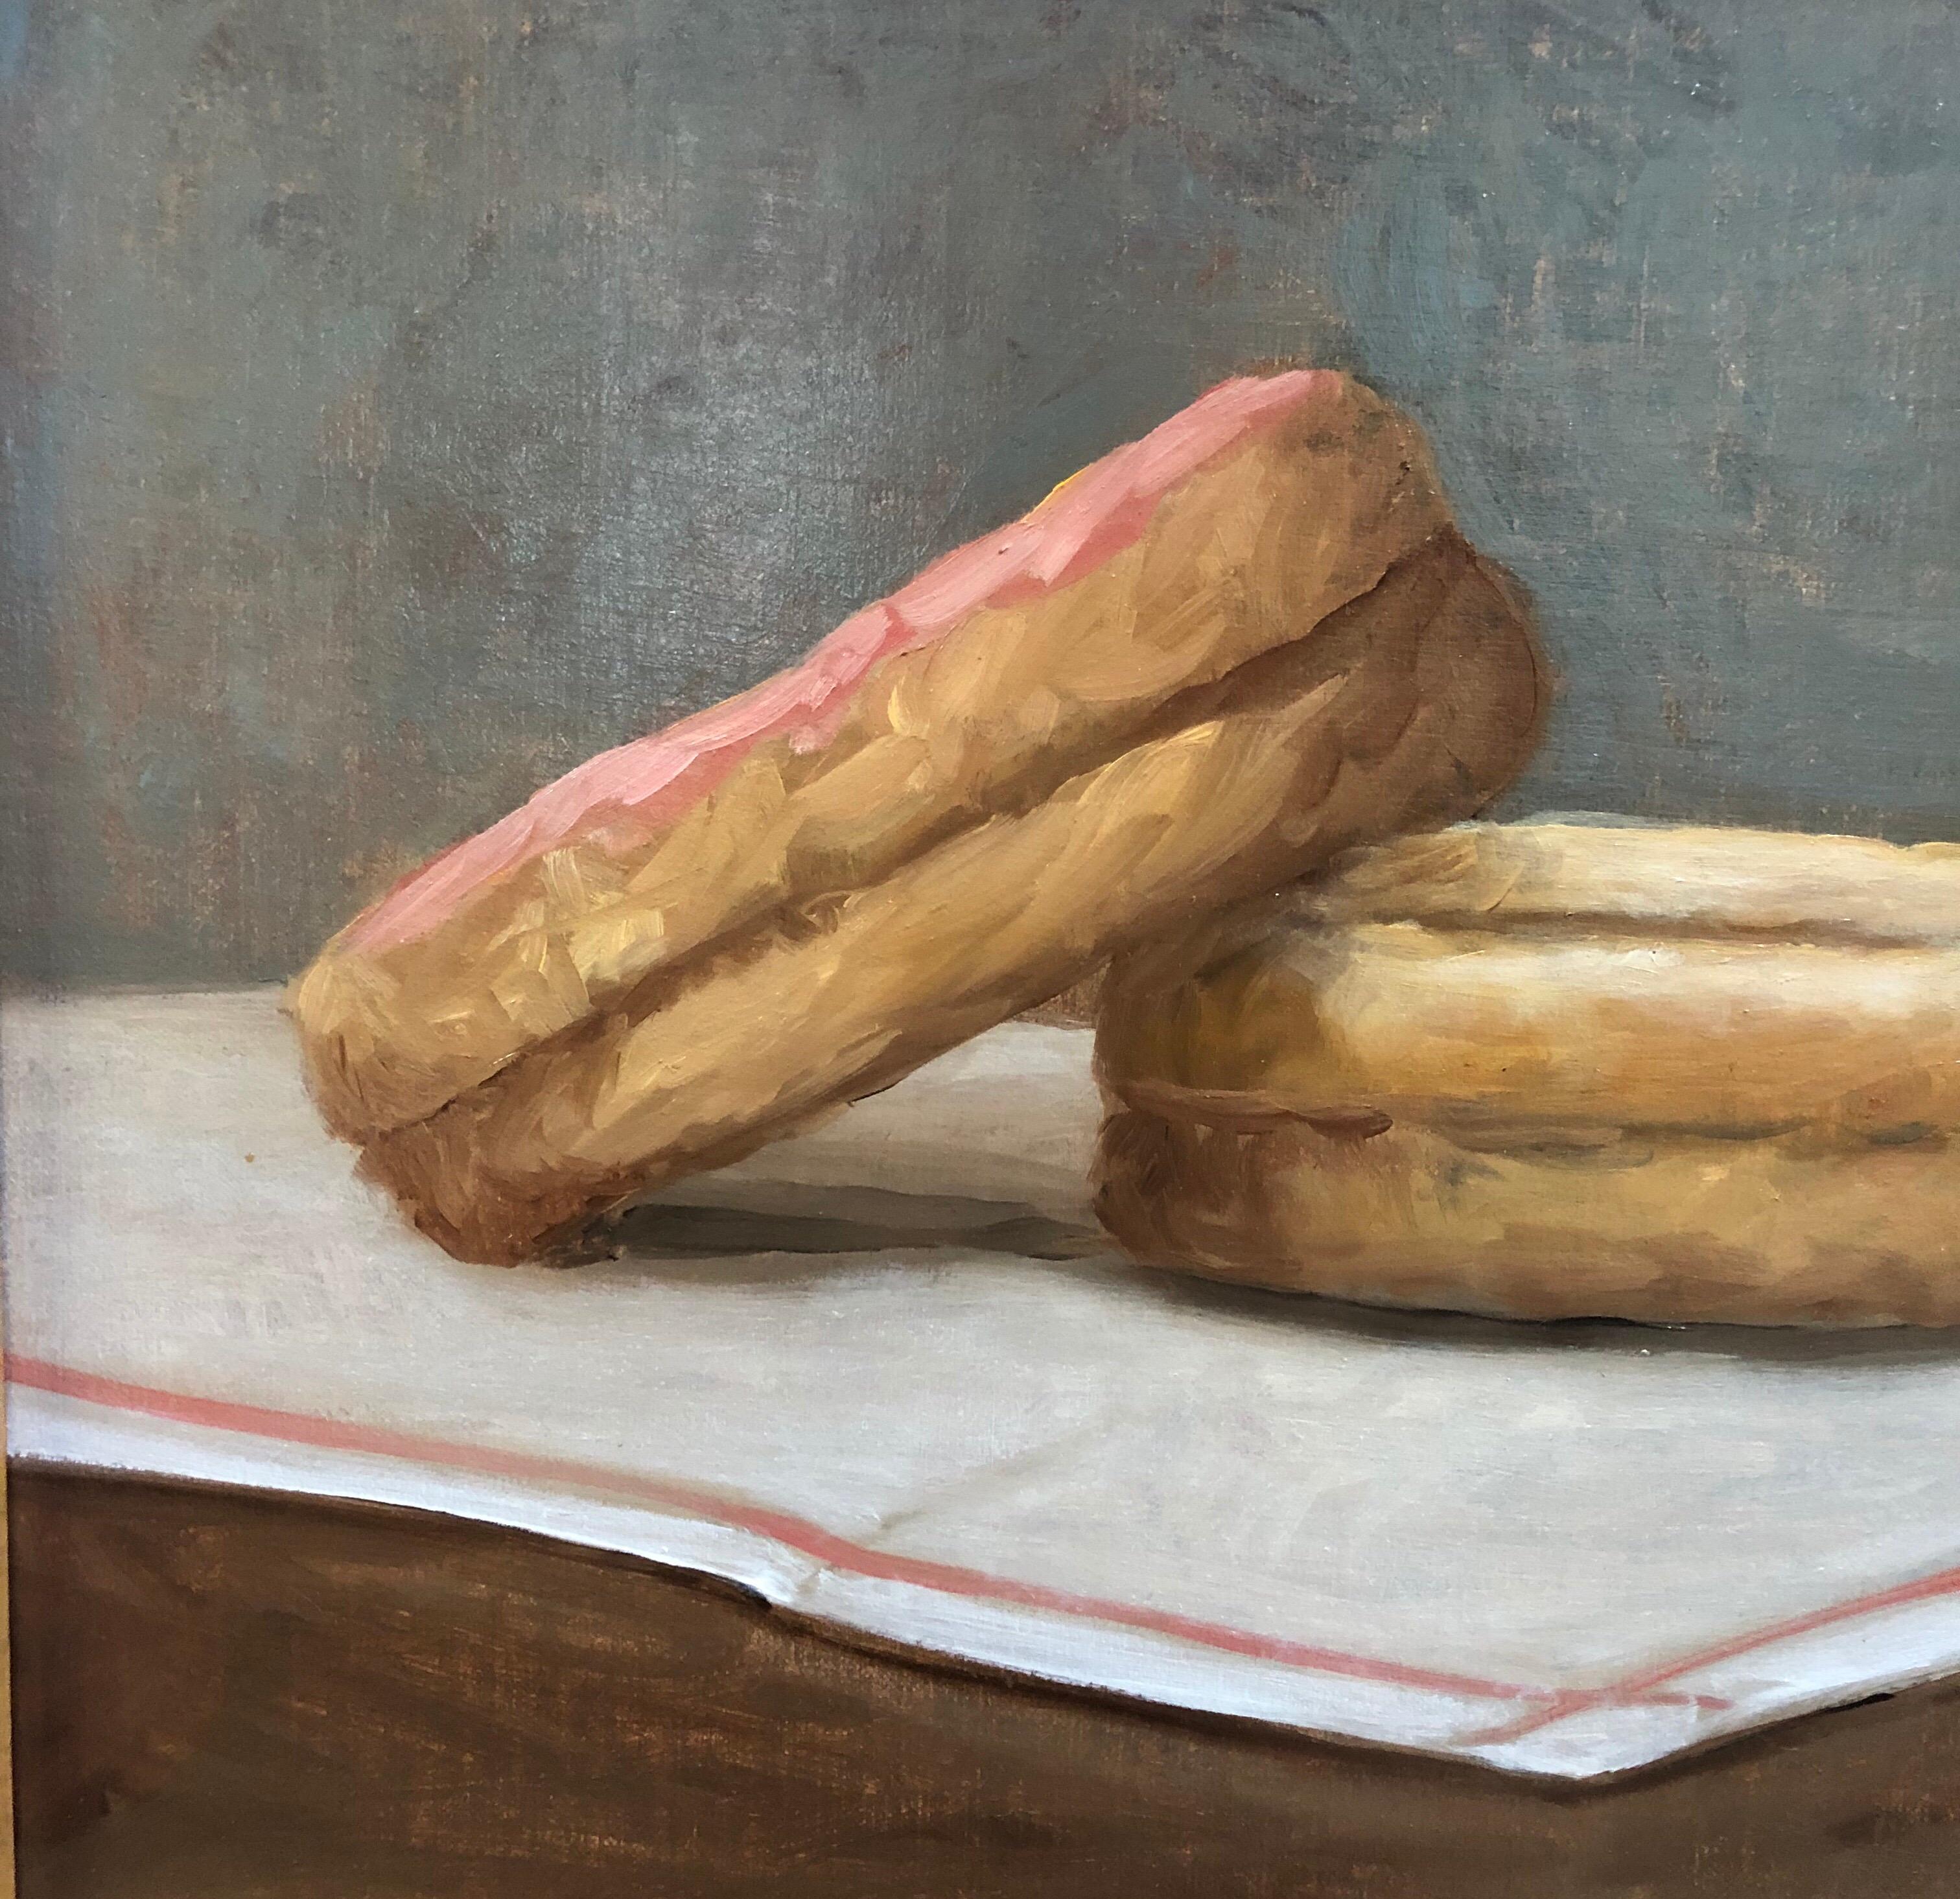 An original framed oil painting of two donuts on a tea towel, evoking a lazy Sunday morning with treats.

GC Williams has a BA in art history and began her artistic career as a self-taught artist. She subsequently studied at several classical